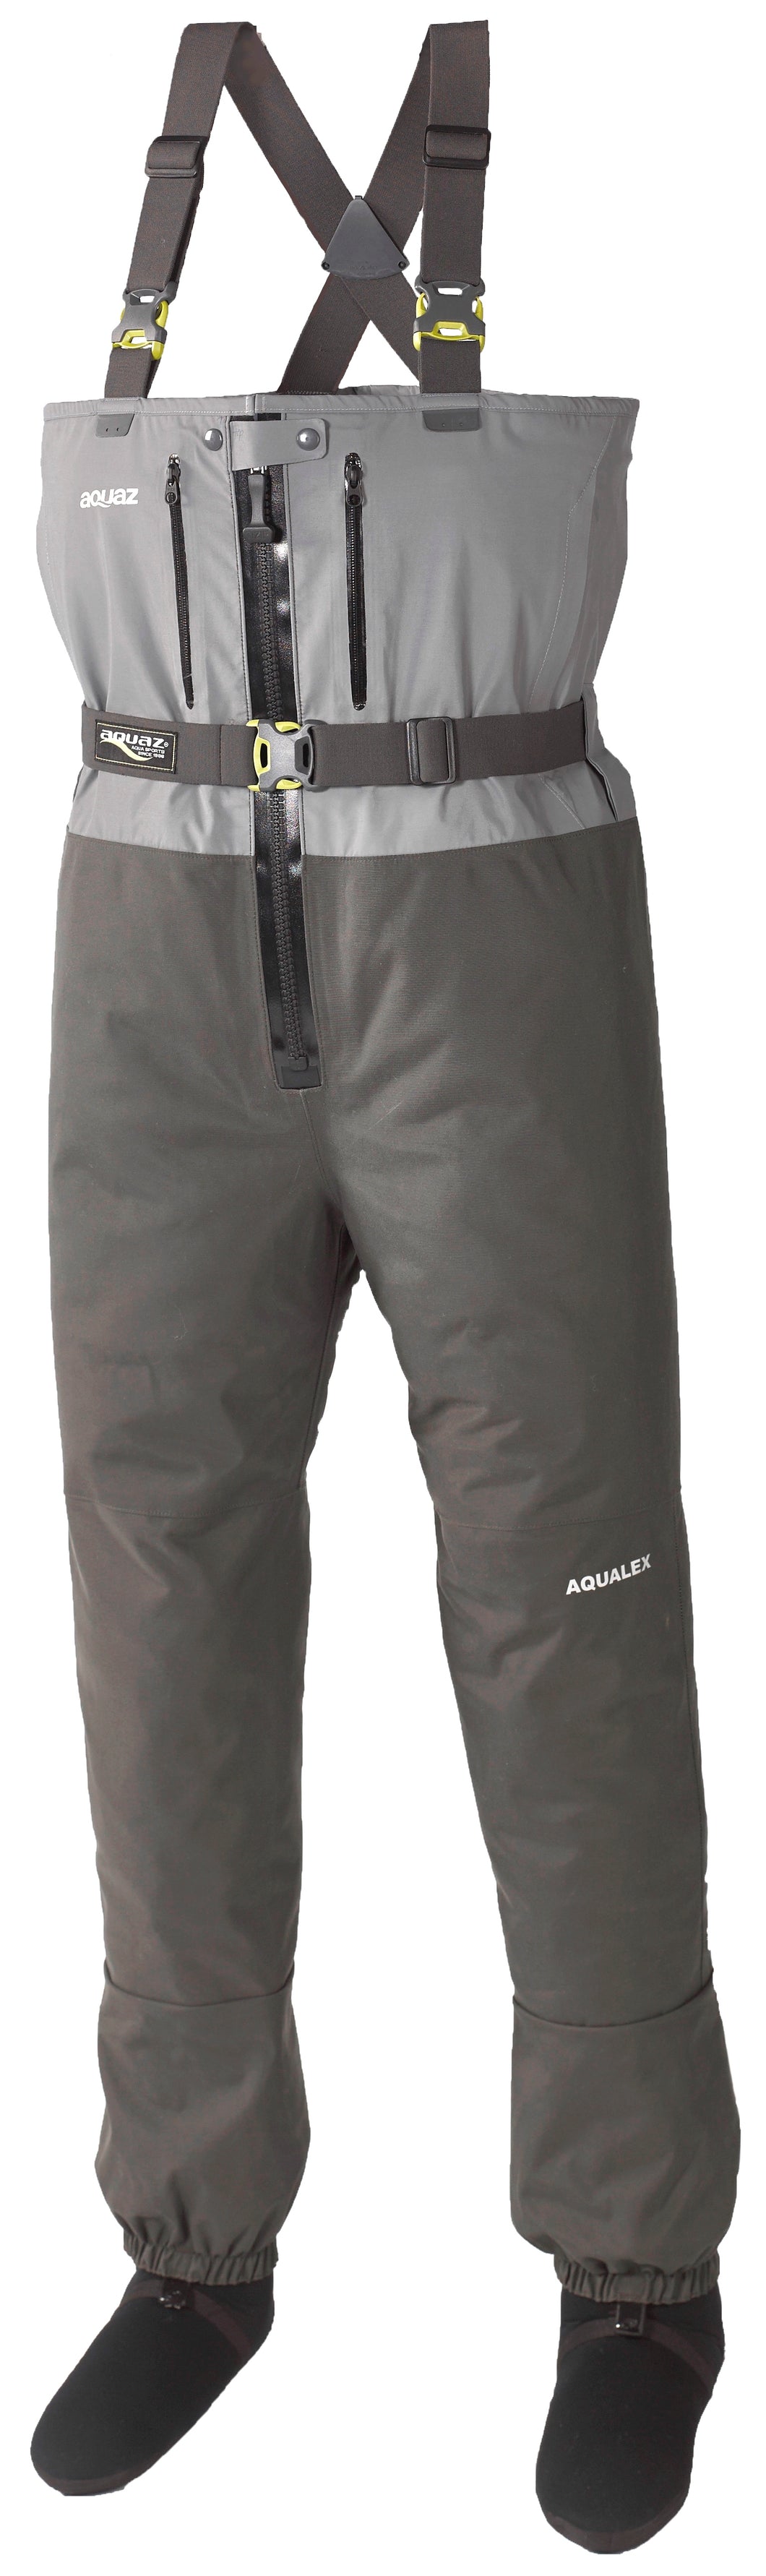 HWBZSZY Kids Waterproof Wading Pants with  